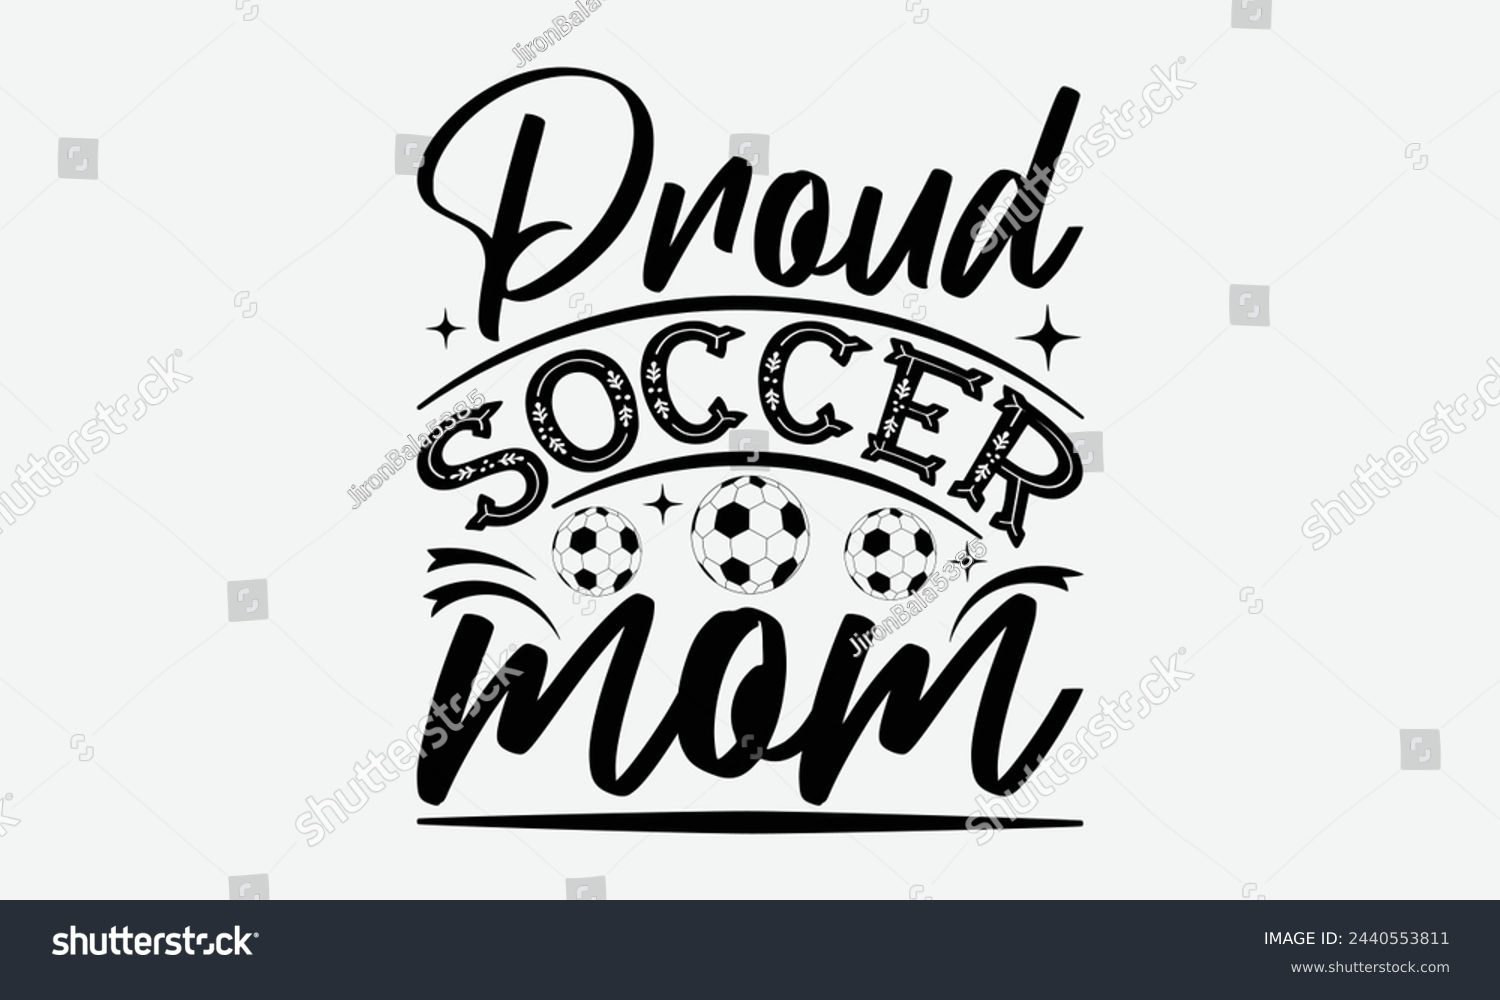 SVG of Proud Soccer Mom - Mom t-shirt design, isolated on white background, this illustration can be used as a print on t-shirts and bags, cover book, template, stationary or as a poster. svg